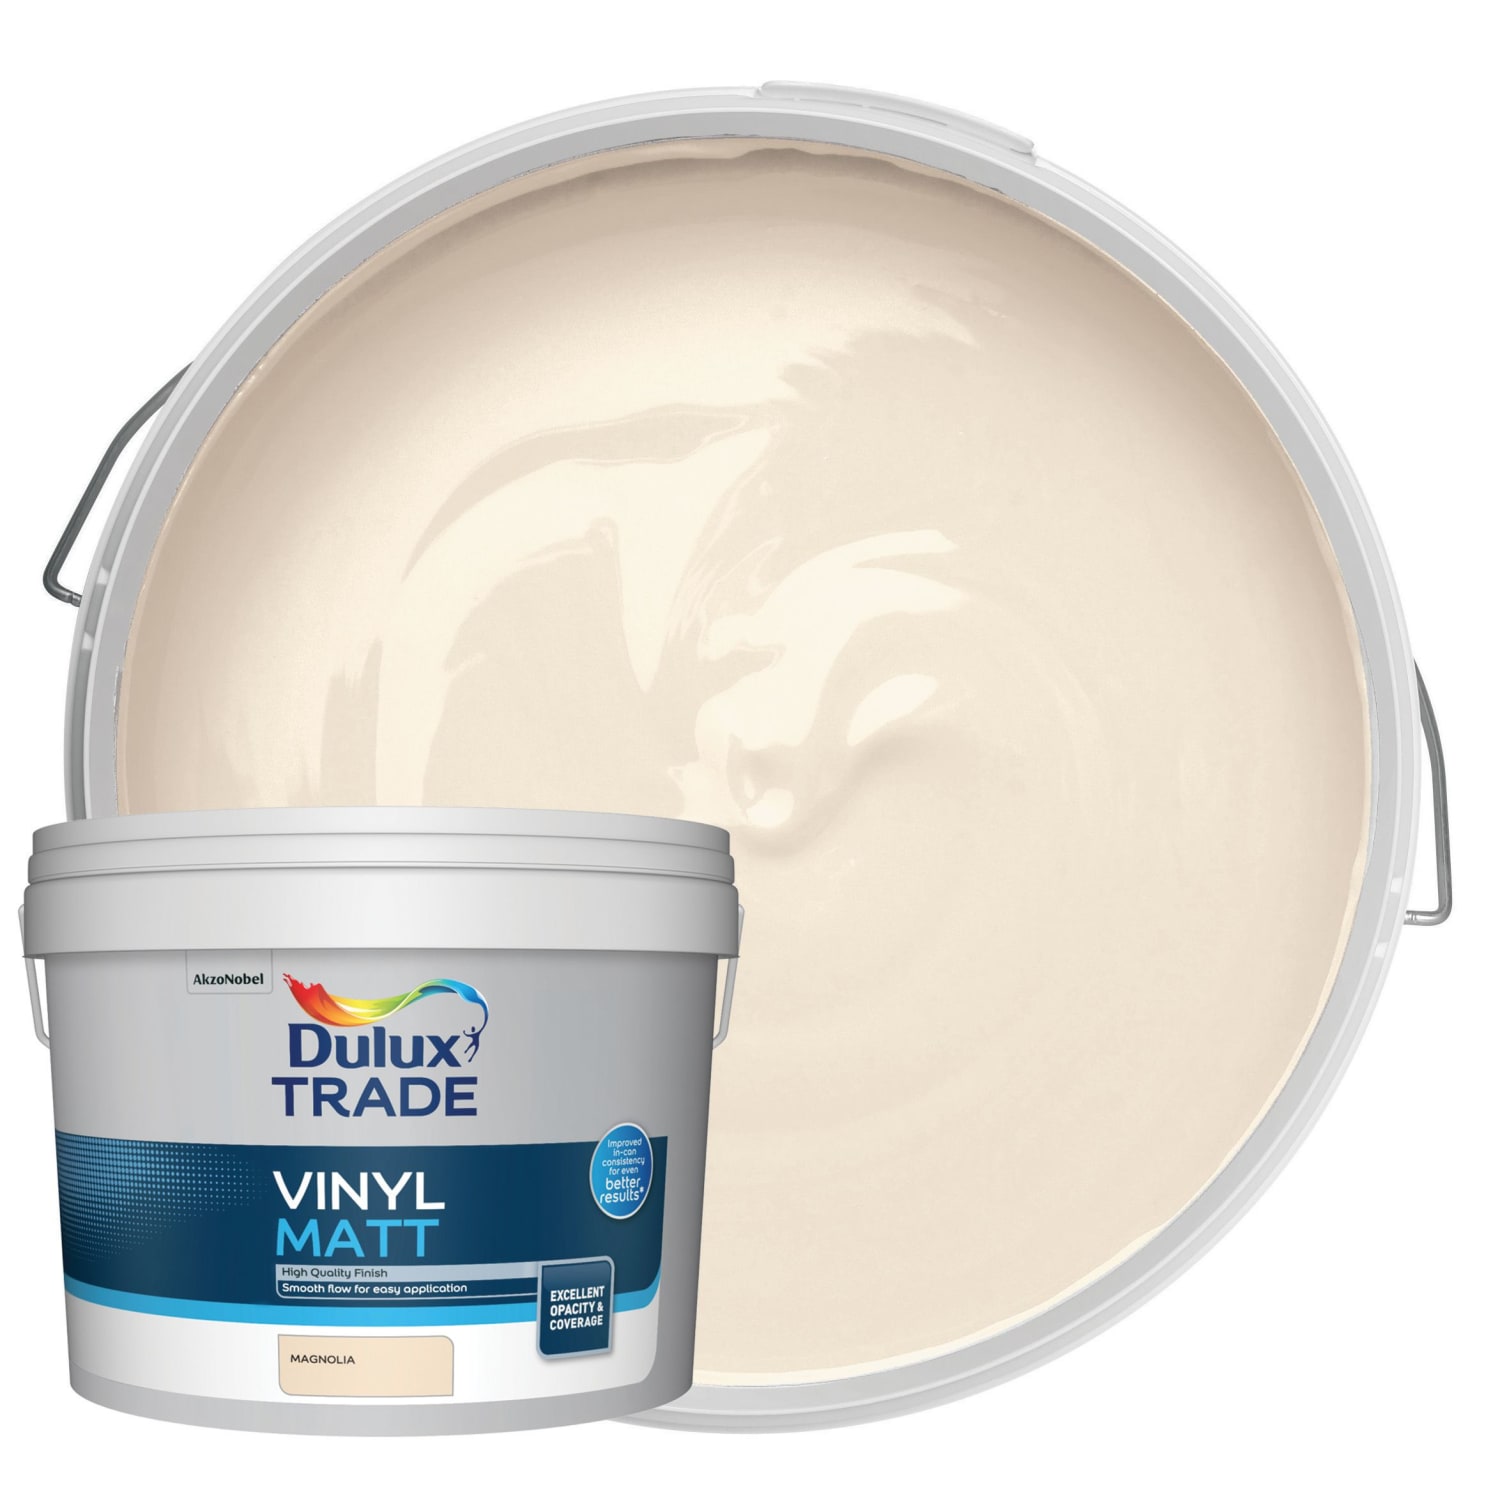 Rhino 10A11 Dulux Trade Paints by Buy Paints Online UK. Shop